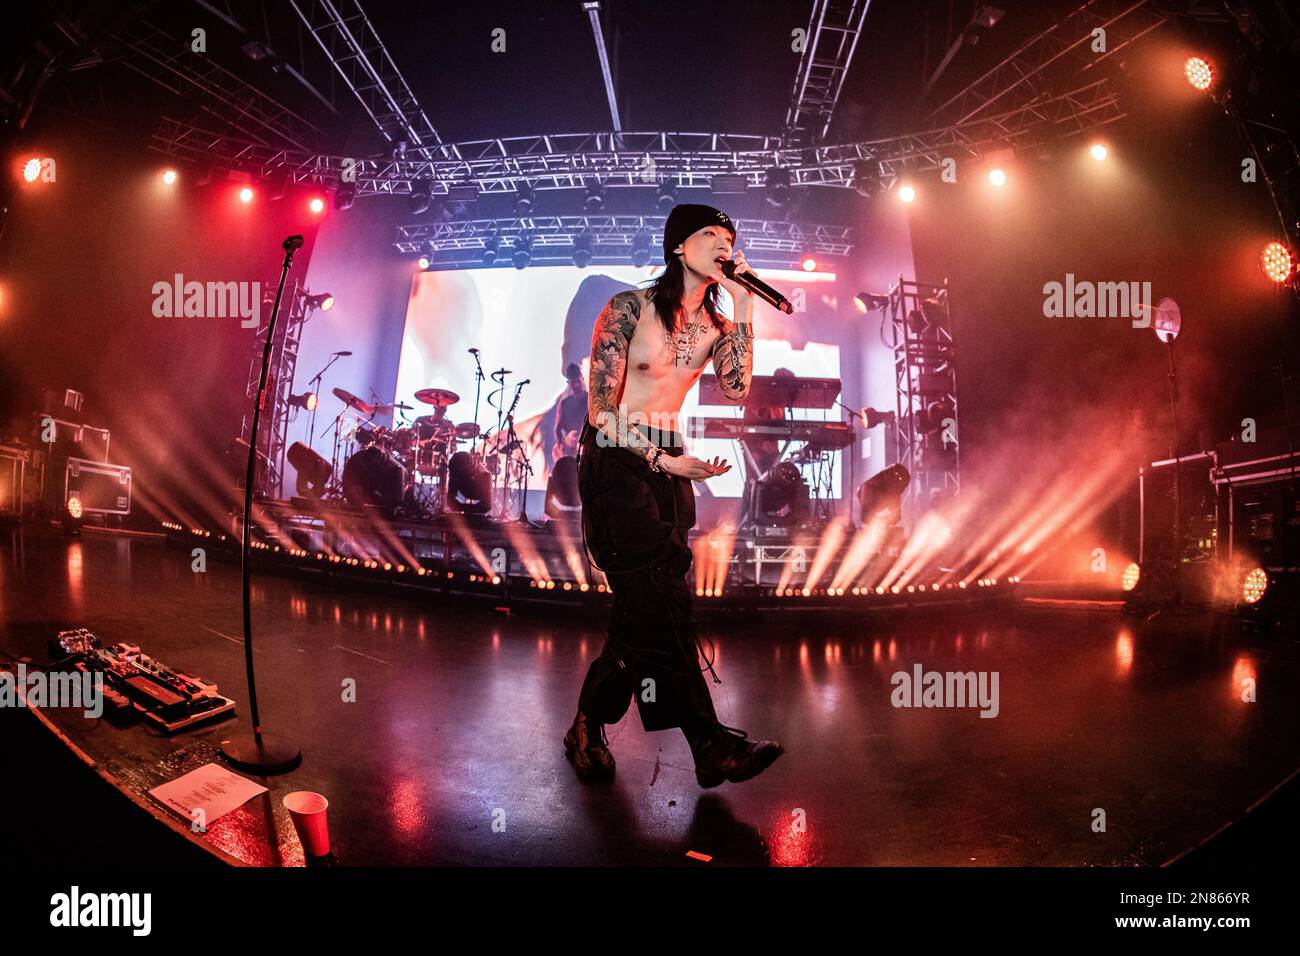 Milan Italy. 10 February 2023. The American singer-songwriter and producer Casey Luong known by his stage name KESHI performs live on stage at Fabrique during the 'Hell & Back Tour'. Stock Photo